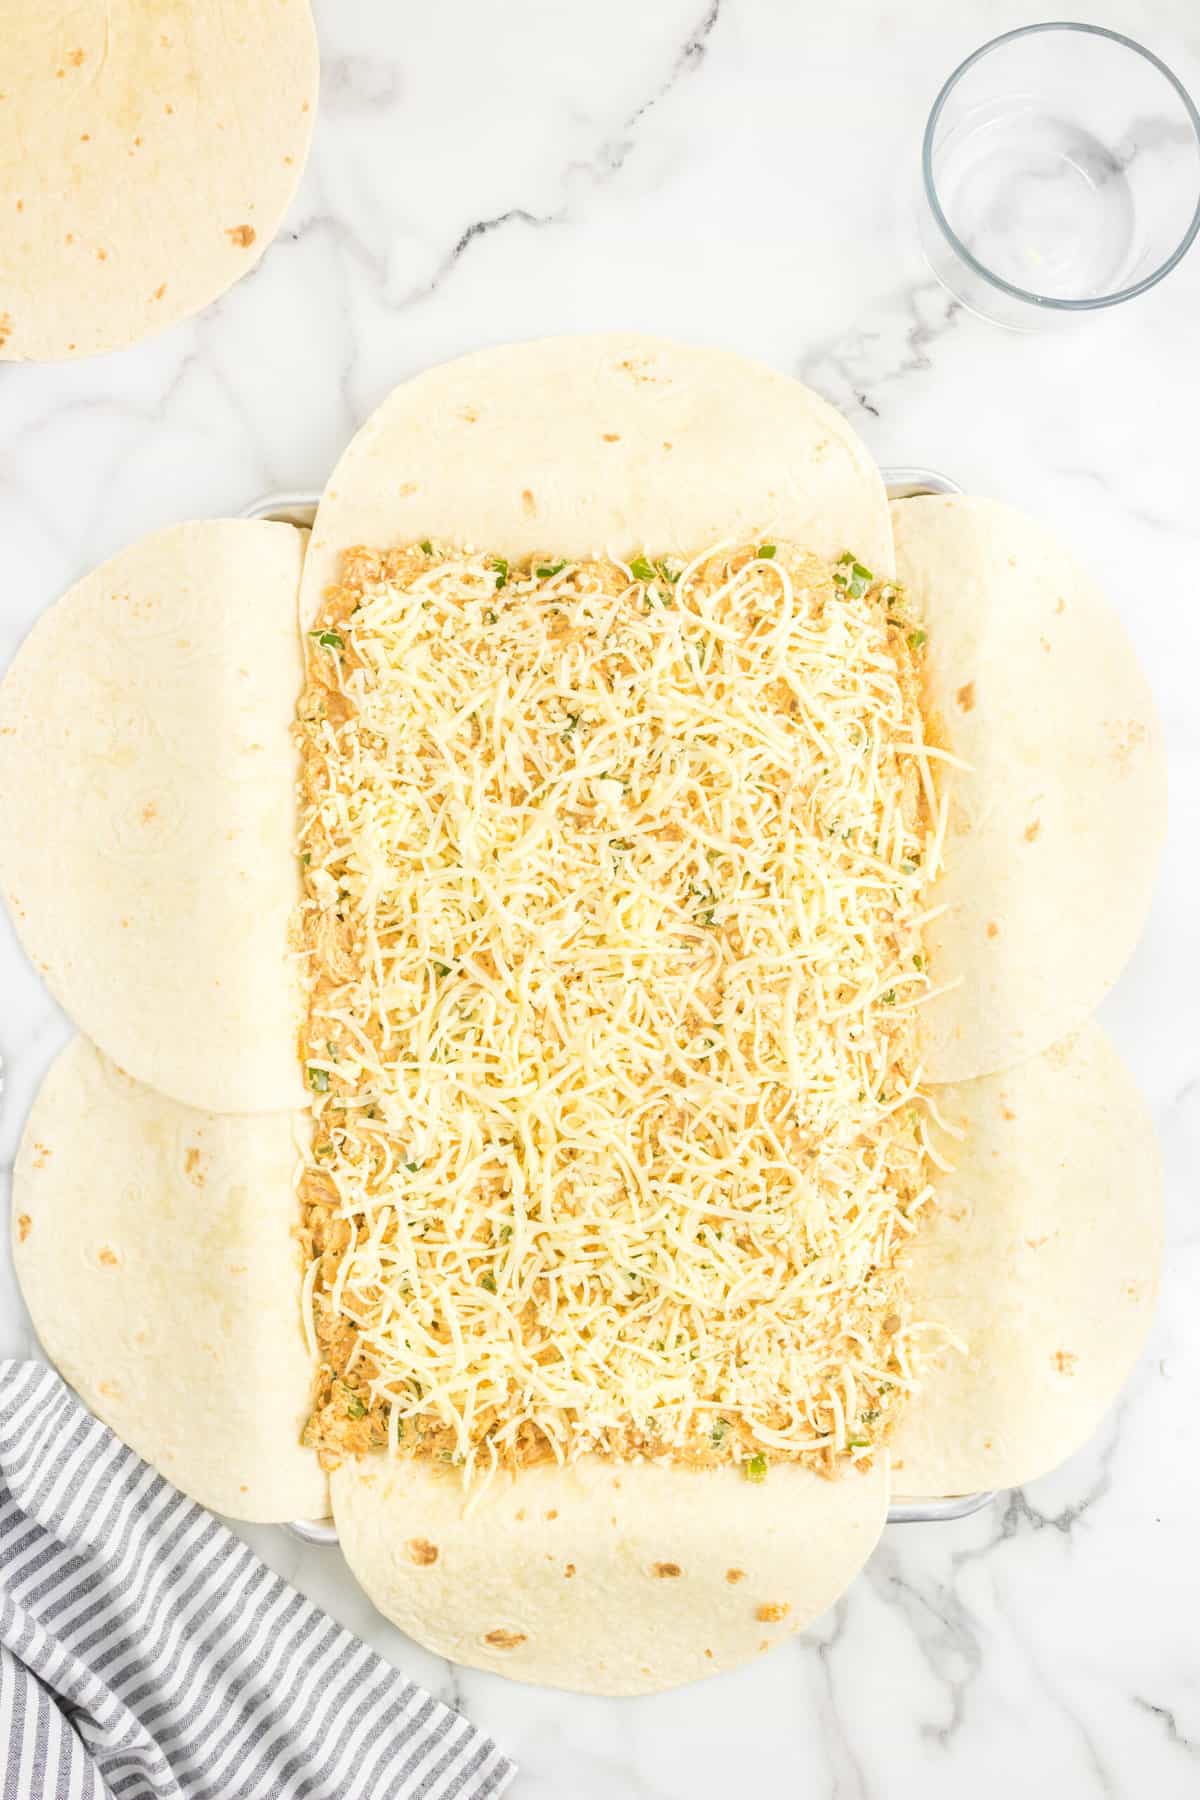 Topping Chicken Mixture with Cheese for Sheet Pan Chicken Quesadillas